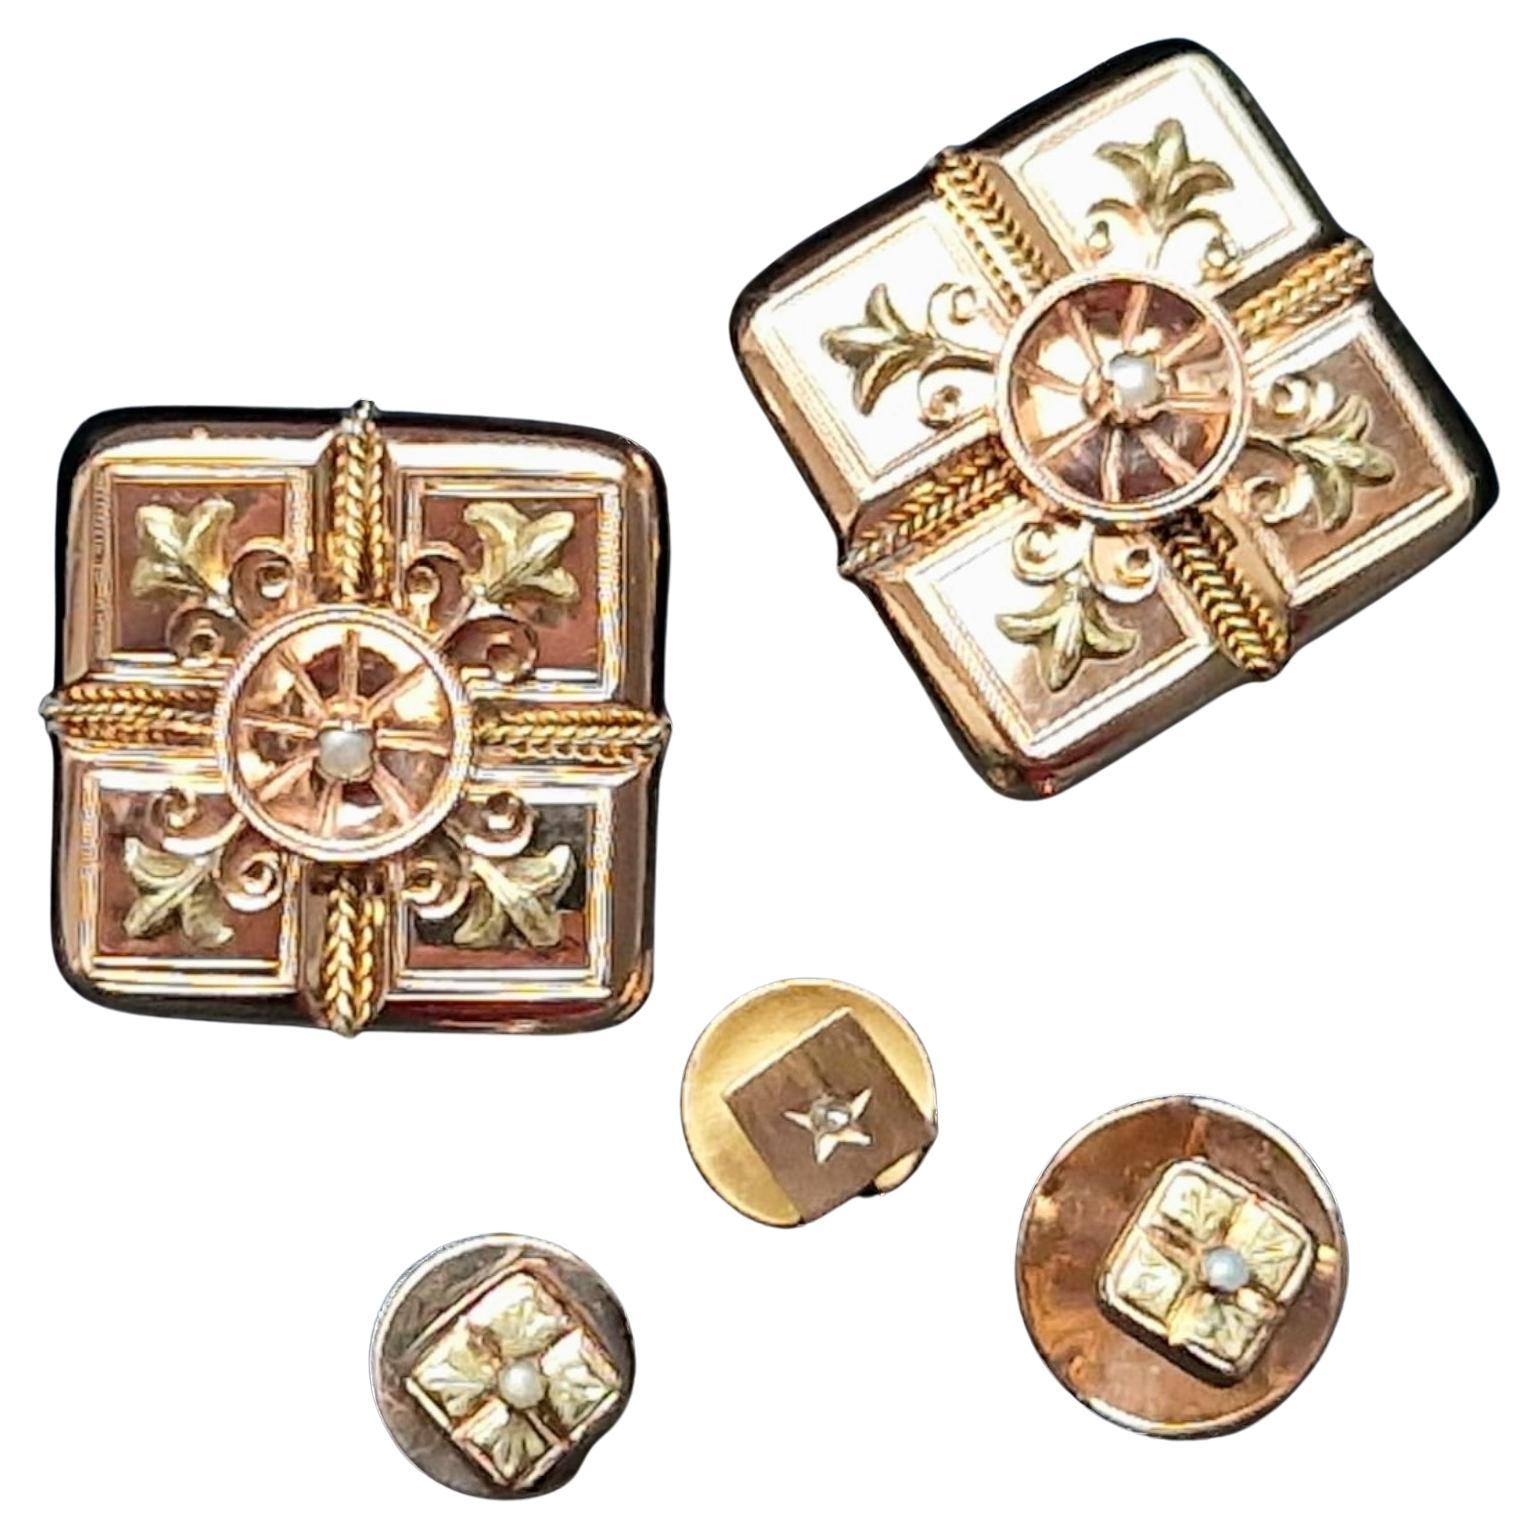 Pair of  Antique French Cufflinks & Studs with Lys Flower design,  19th C (1850)